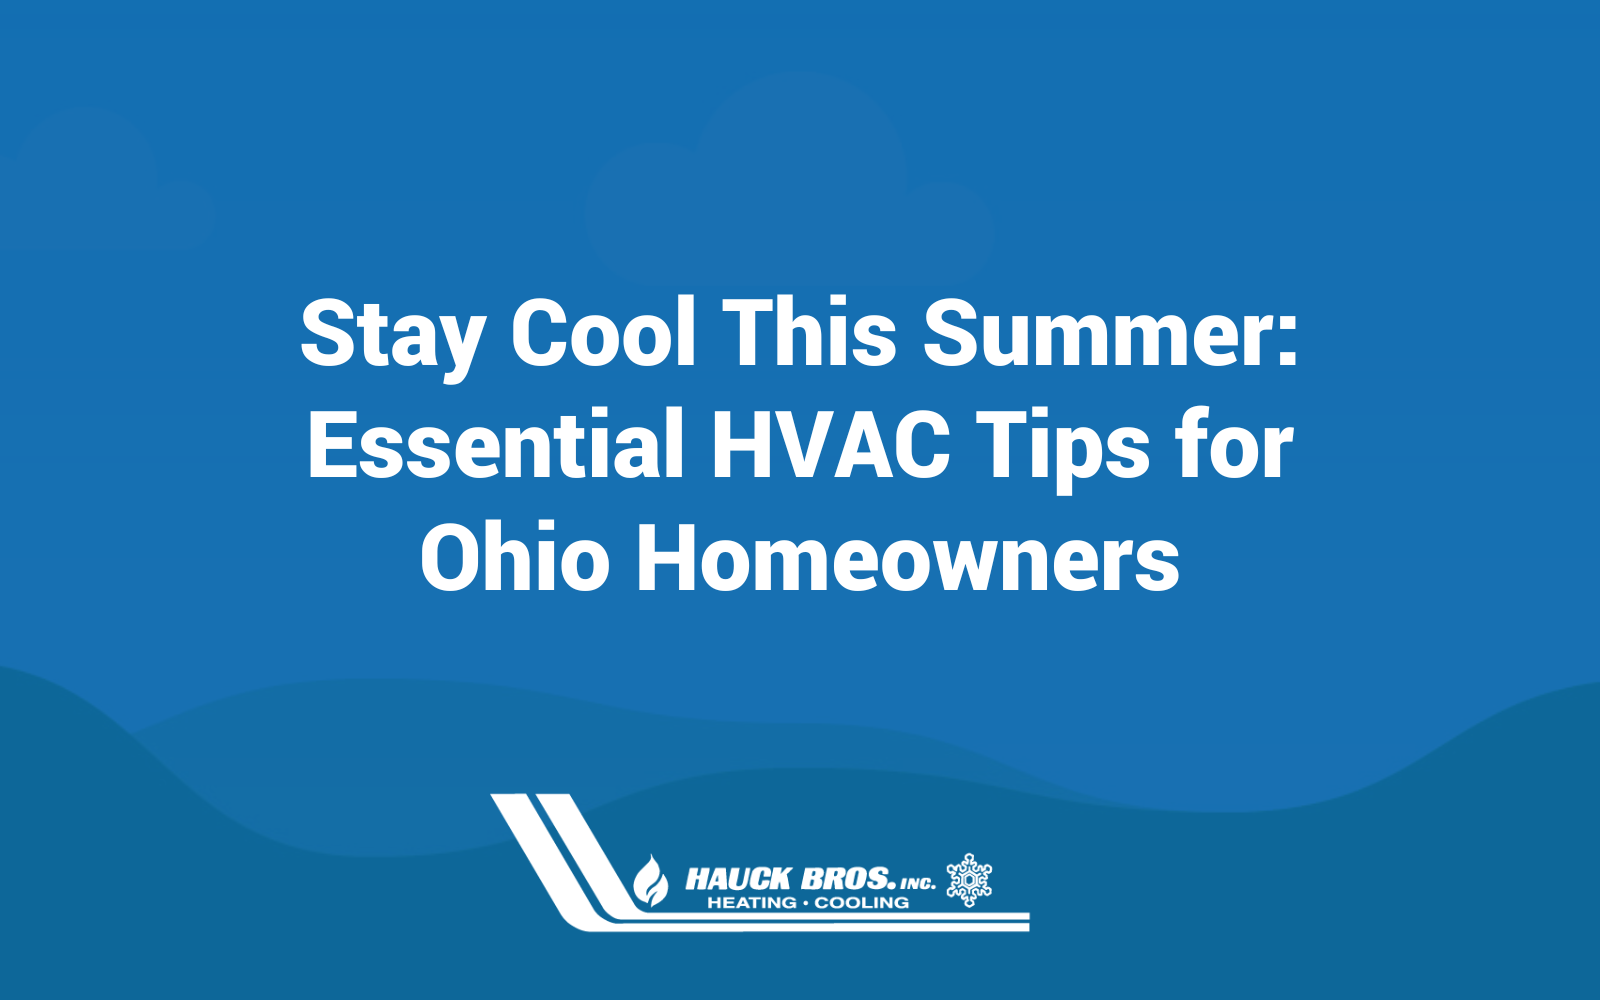 Stay Cool This Summer Essential HVAC Tips for Ohio Homeowners